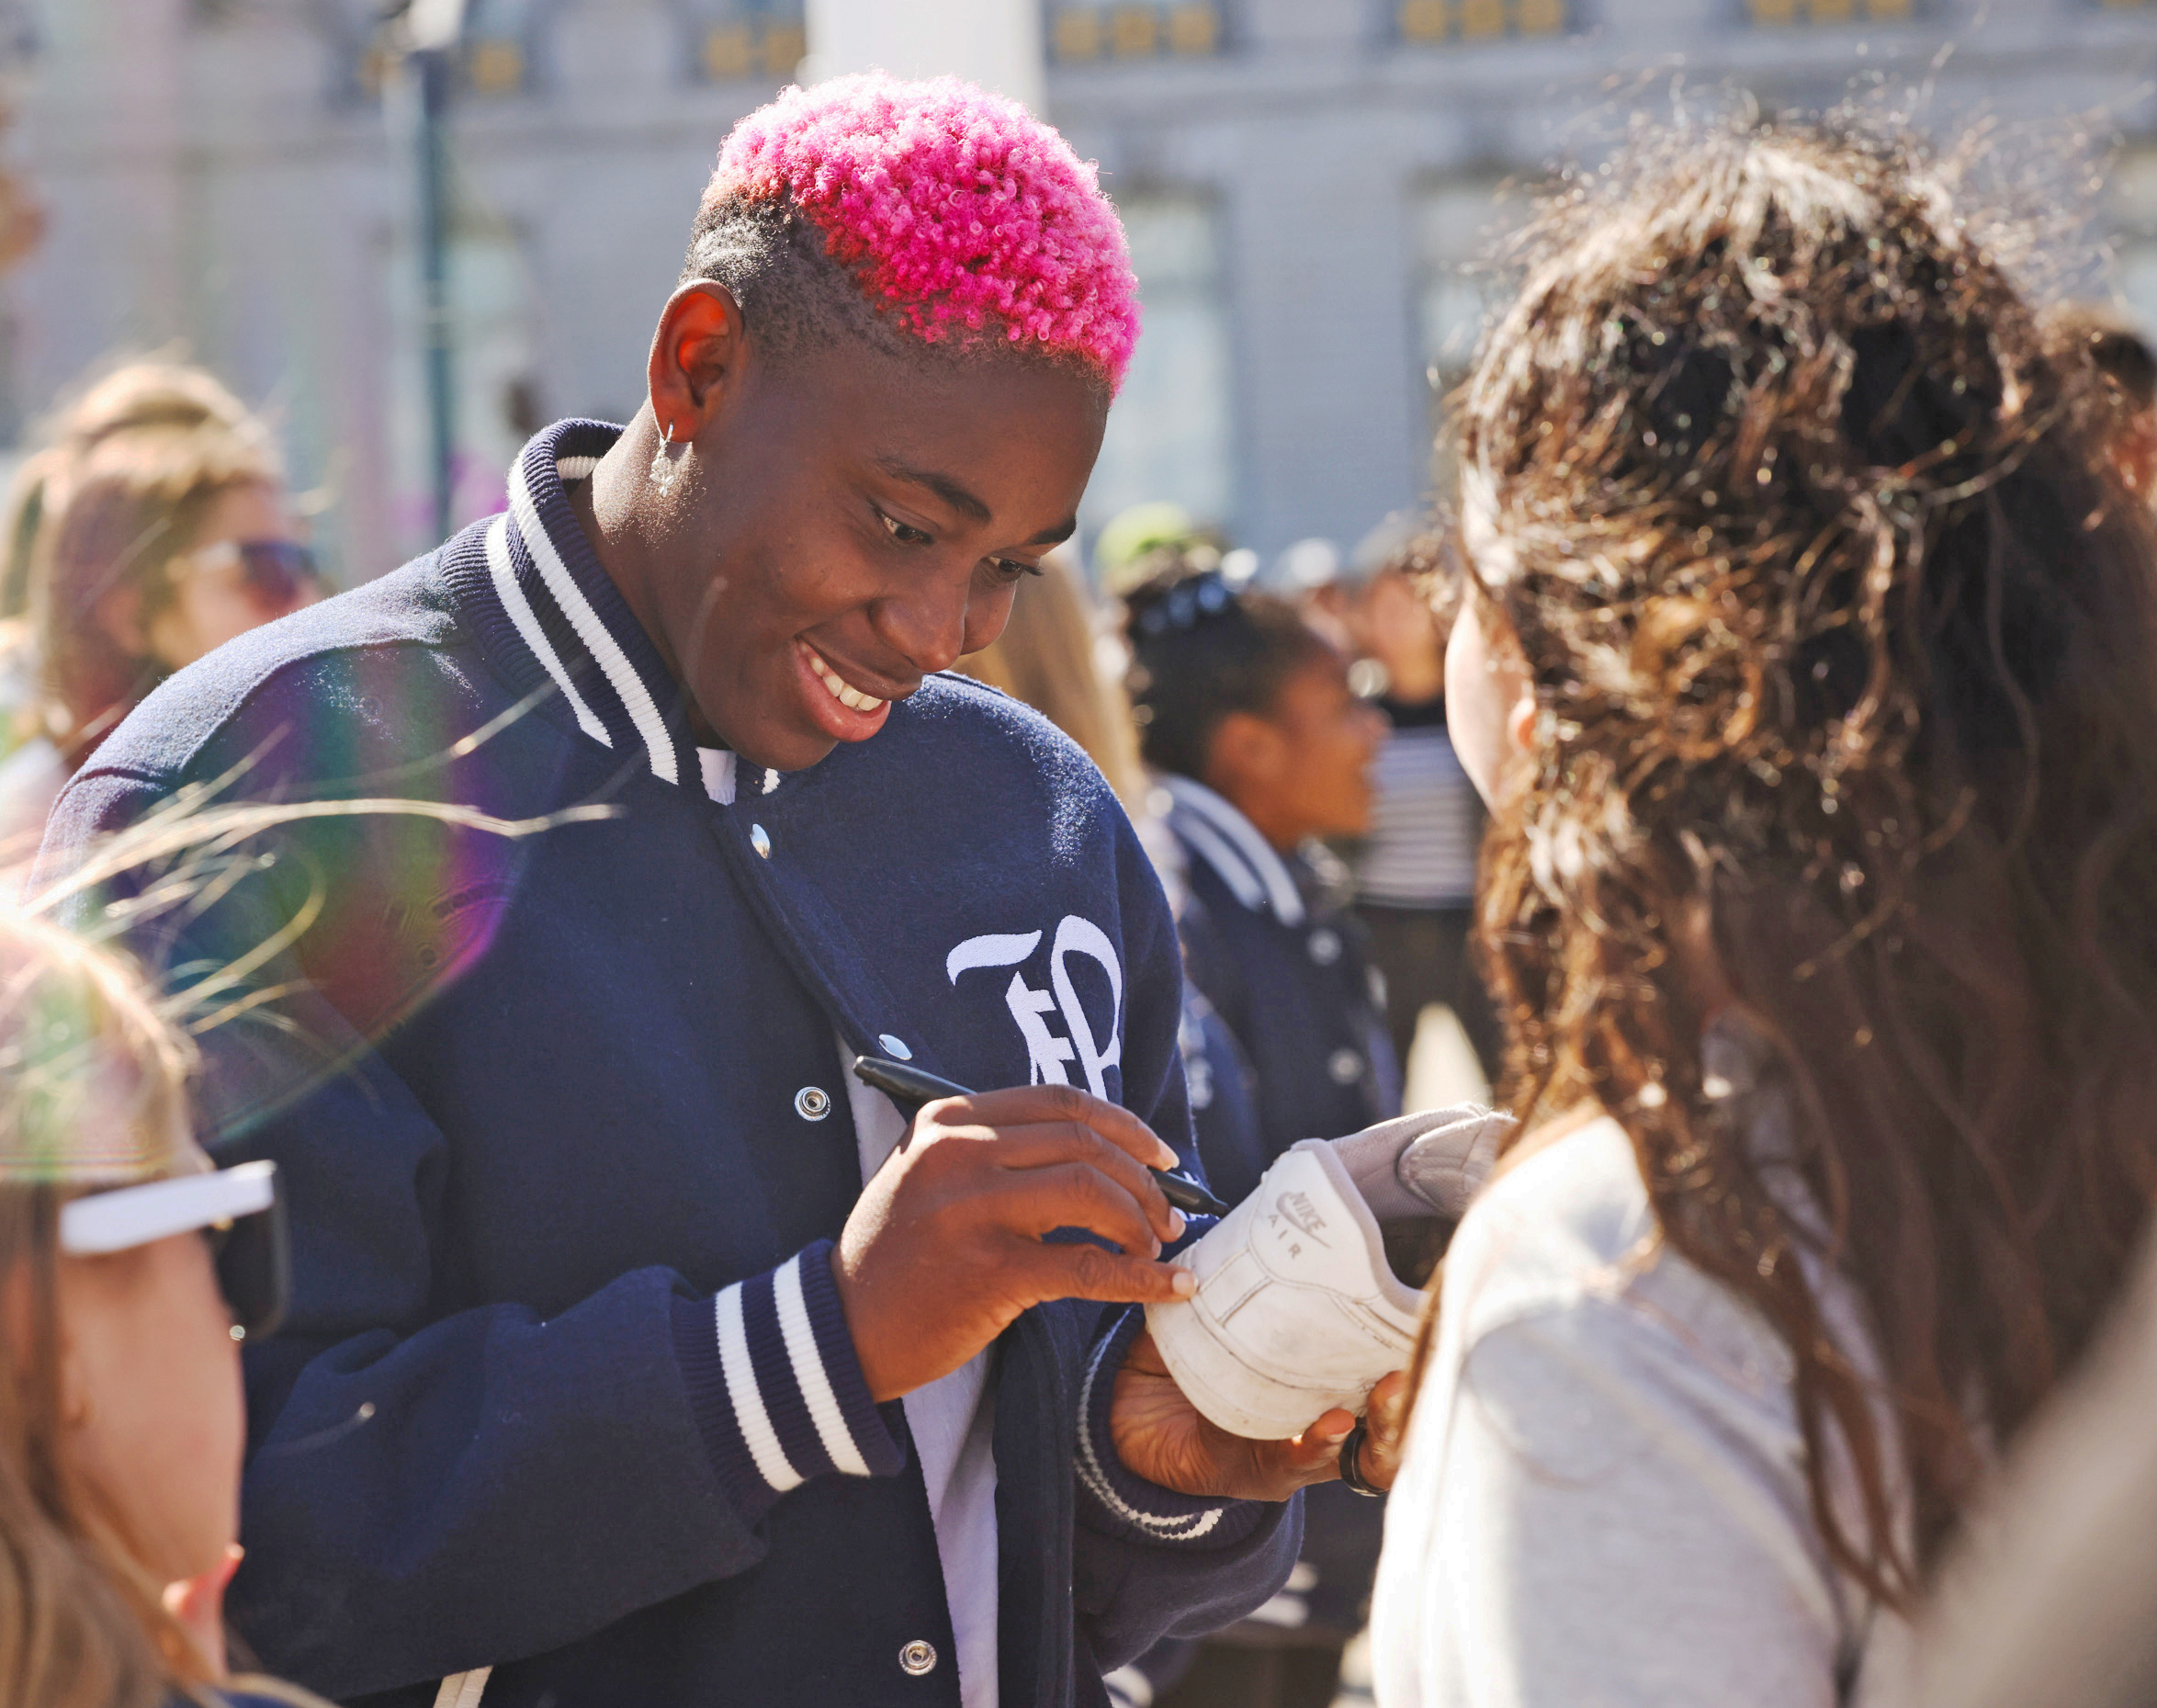 A person with pink hair is smiling and signing a white shoe for a fan outdoors, in a sunny, crowded setting.